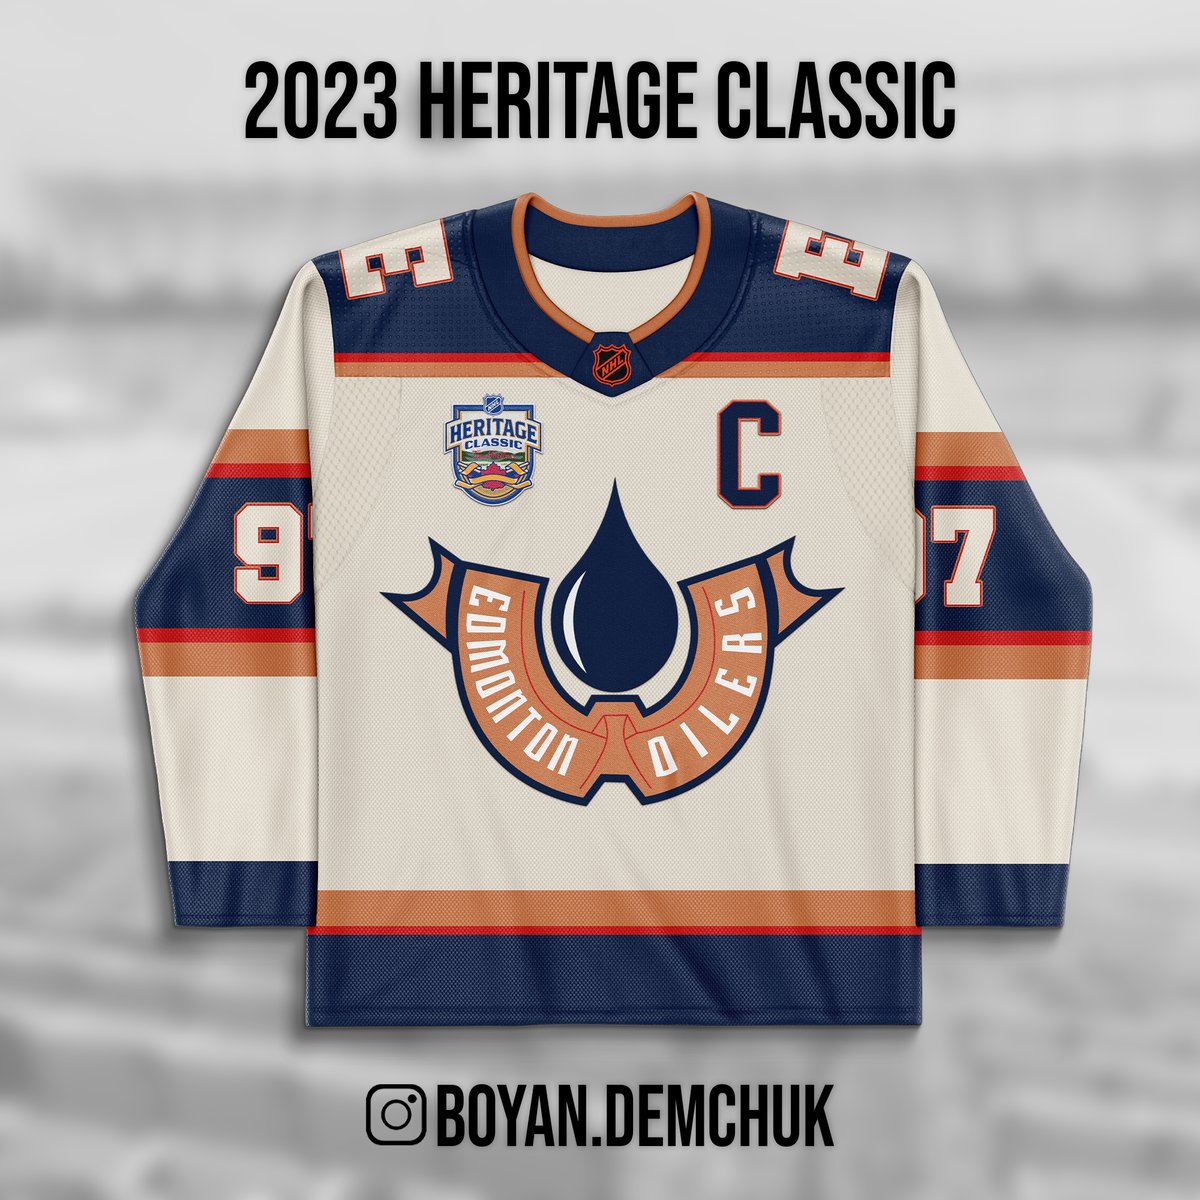 Boyan Demchuk on X: The 2023 Heritage Classic is reportedly going to be  fought between the Flames and the Oilers. I've put together a concept for  each team that pulls from various